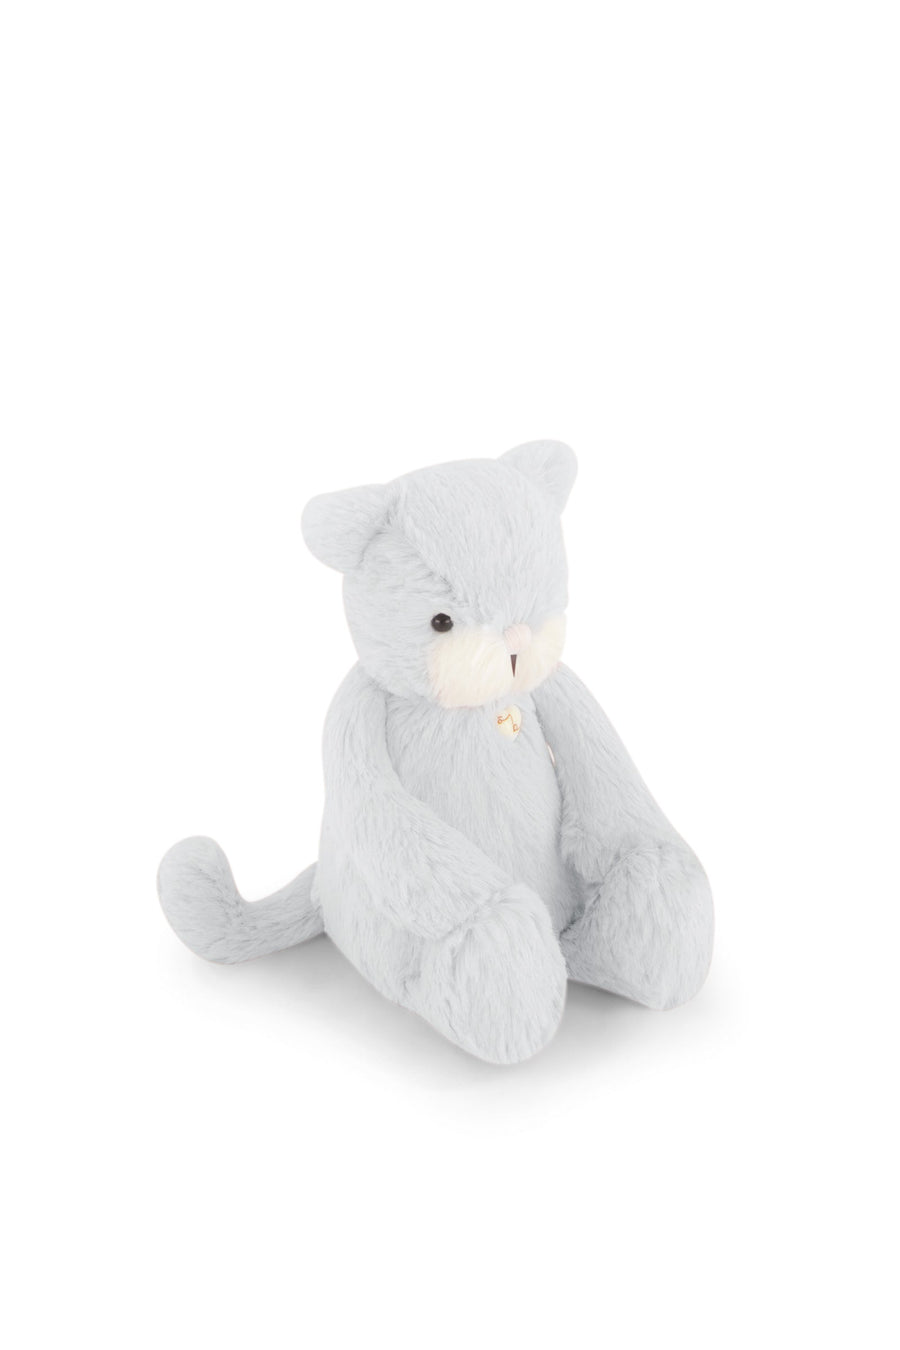 Snuggle Bunnies - Elsie the Kitty - Moonbeam Childrens Toy from Jamie Kay NZ